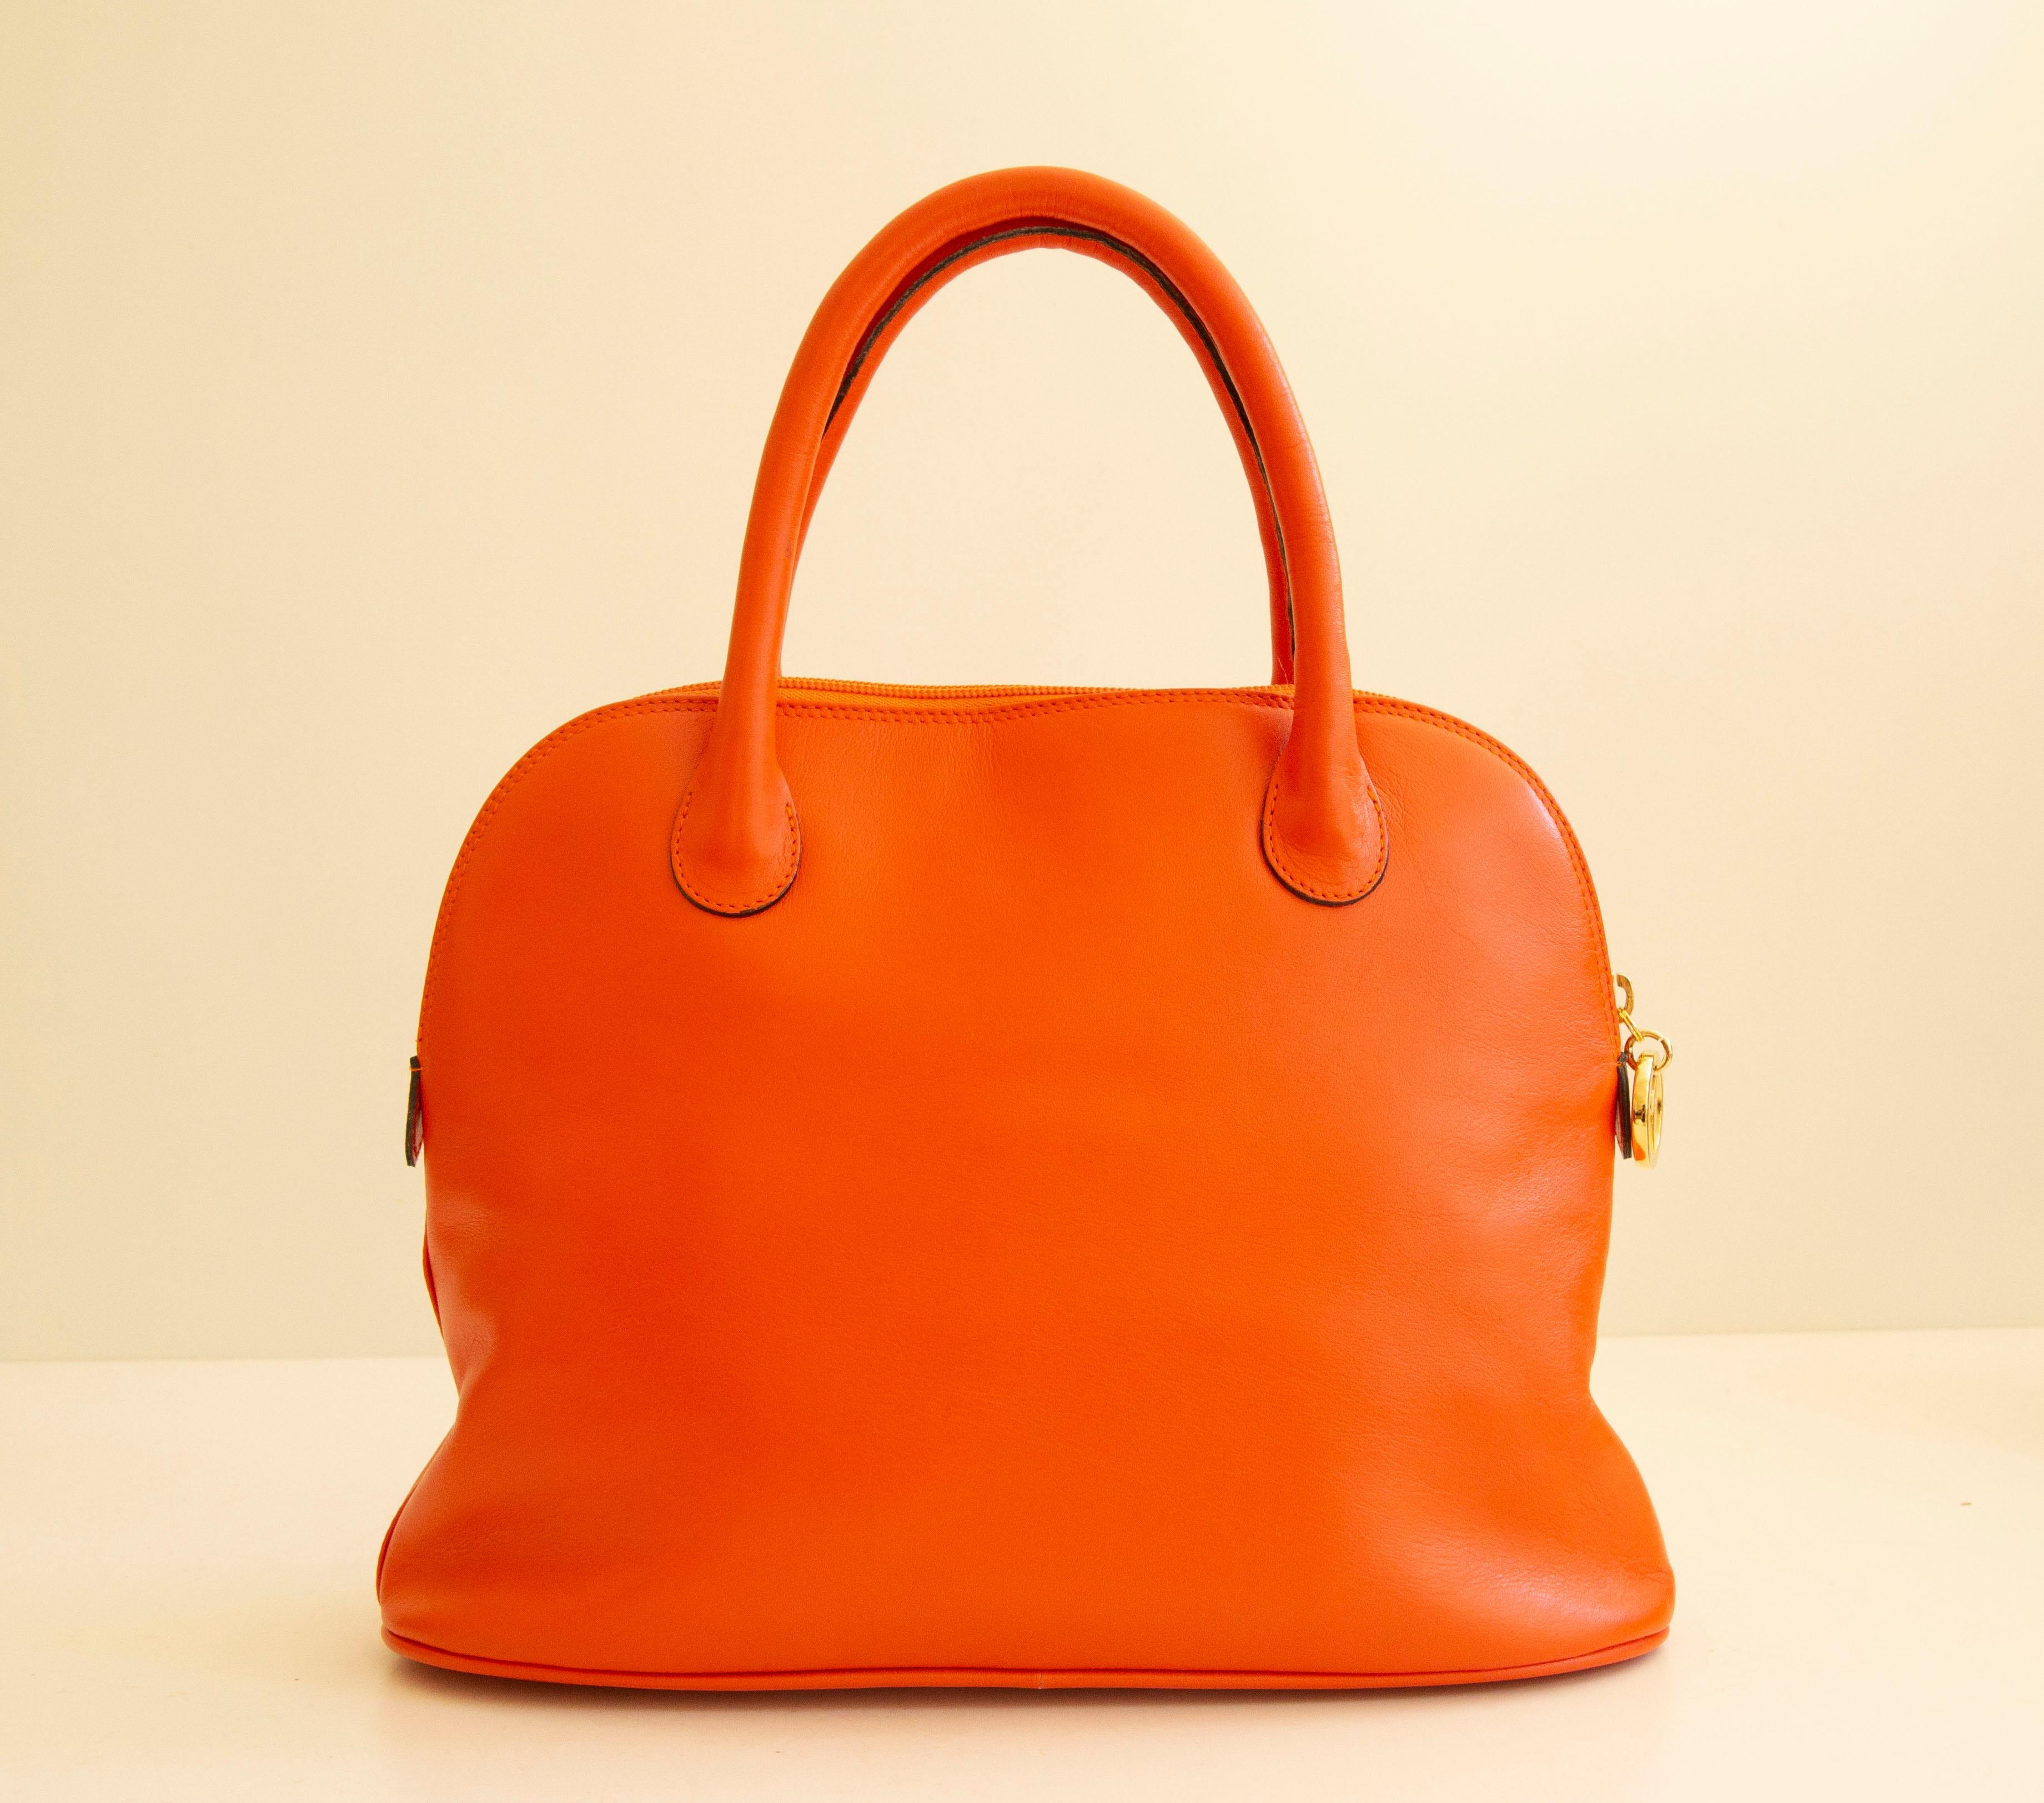 Women's Paloma Picasso Top Handle Bag in Orange Leather 1980’s – 90’s